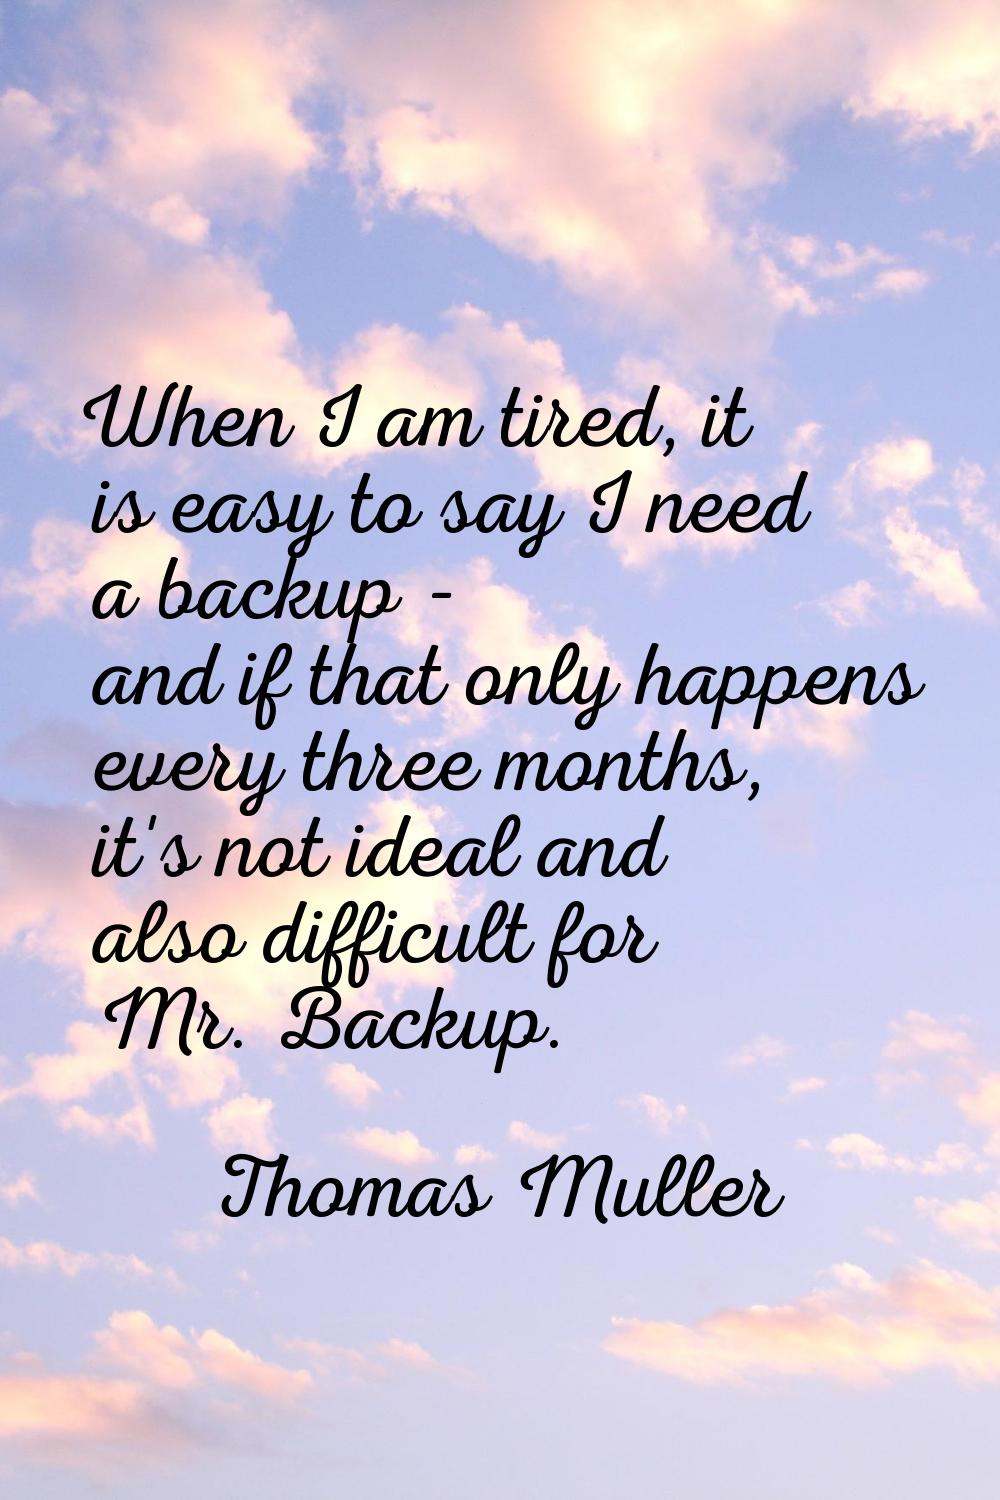 When I am tired, it is easy to say I need a backup - and if that only happens every three months, i